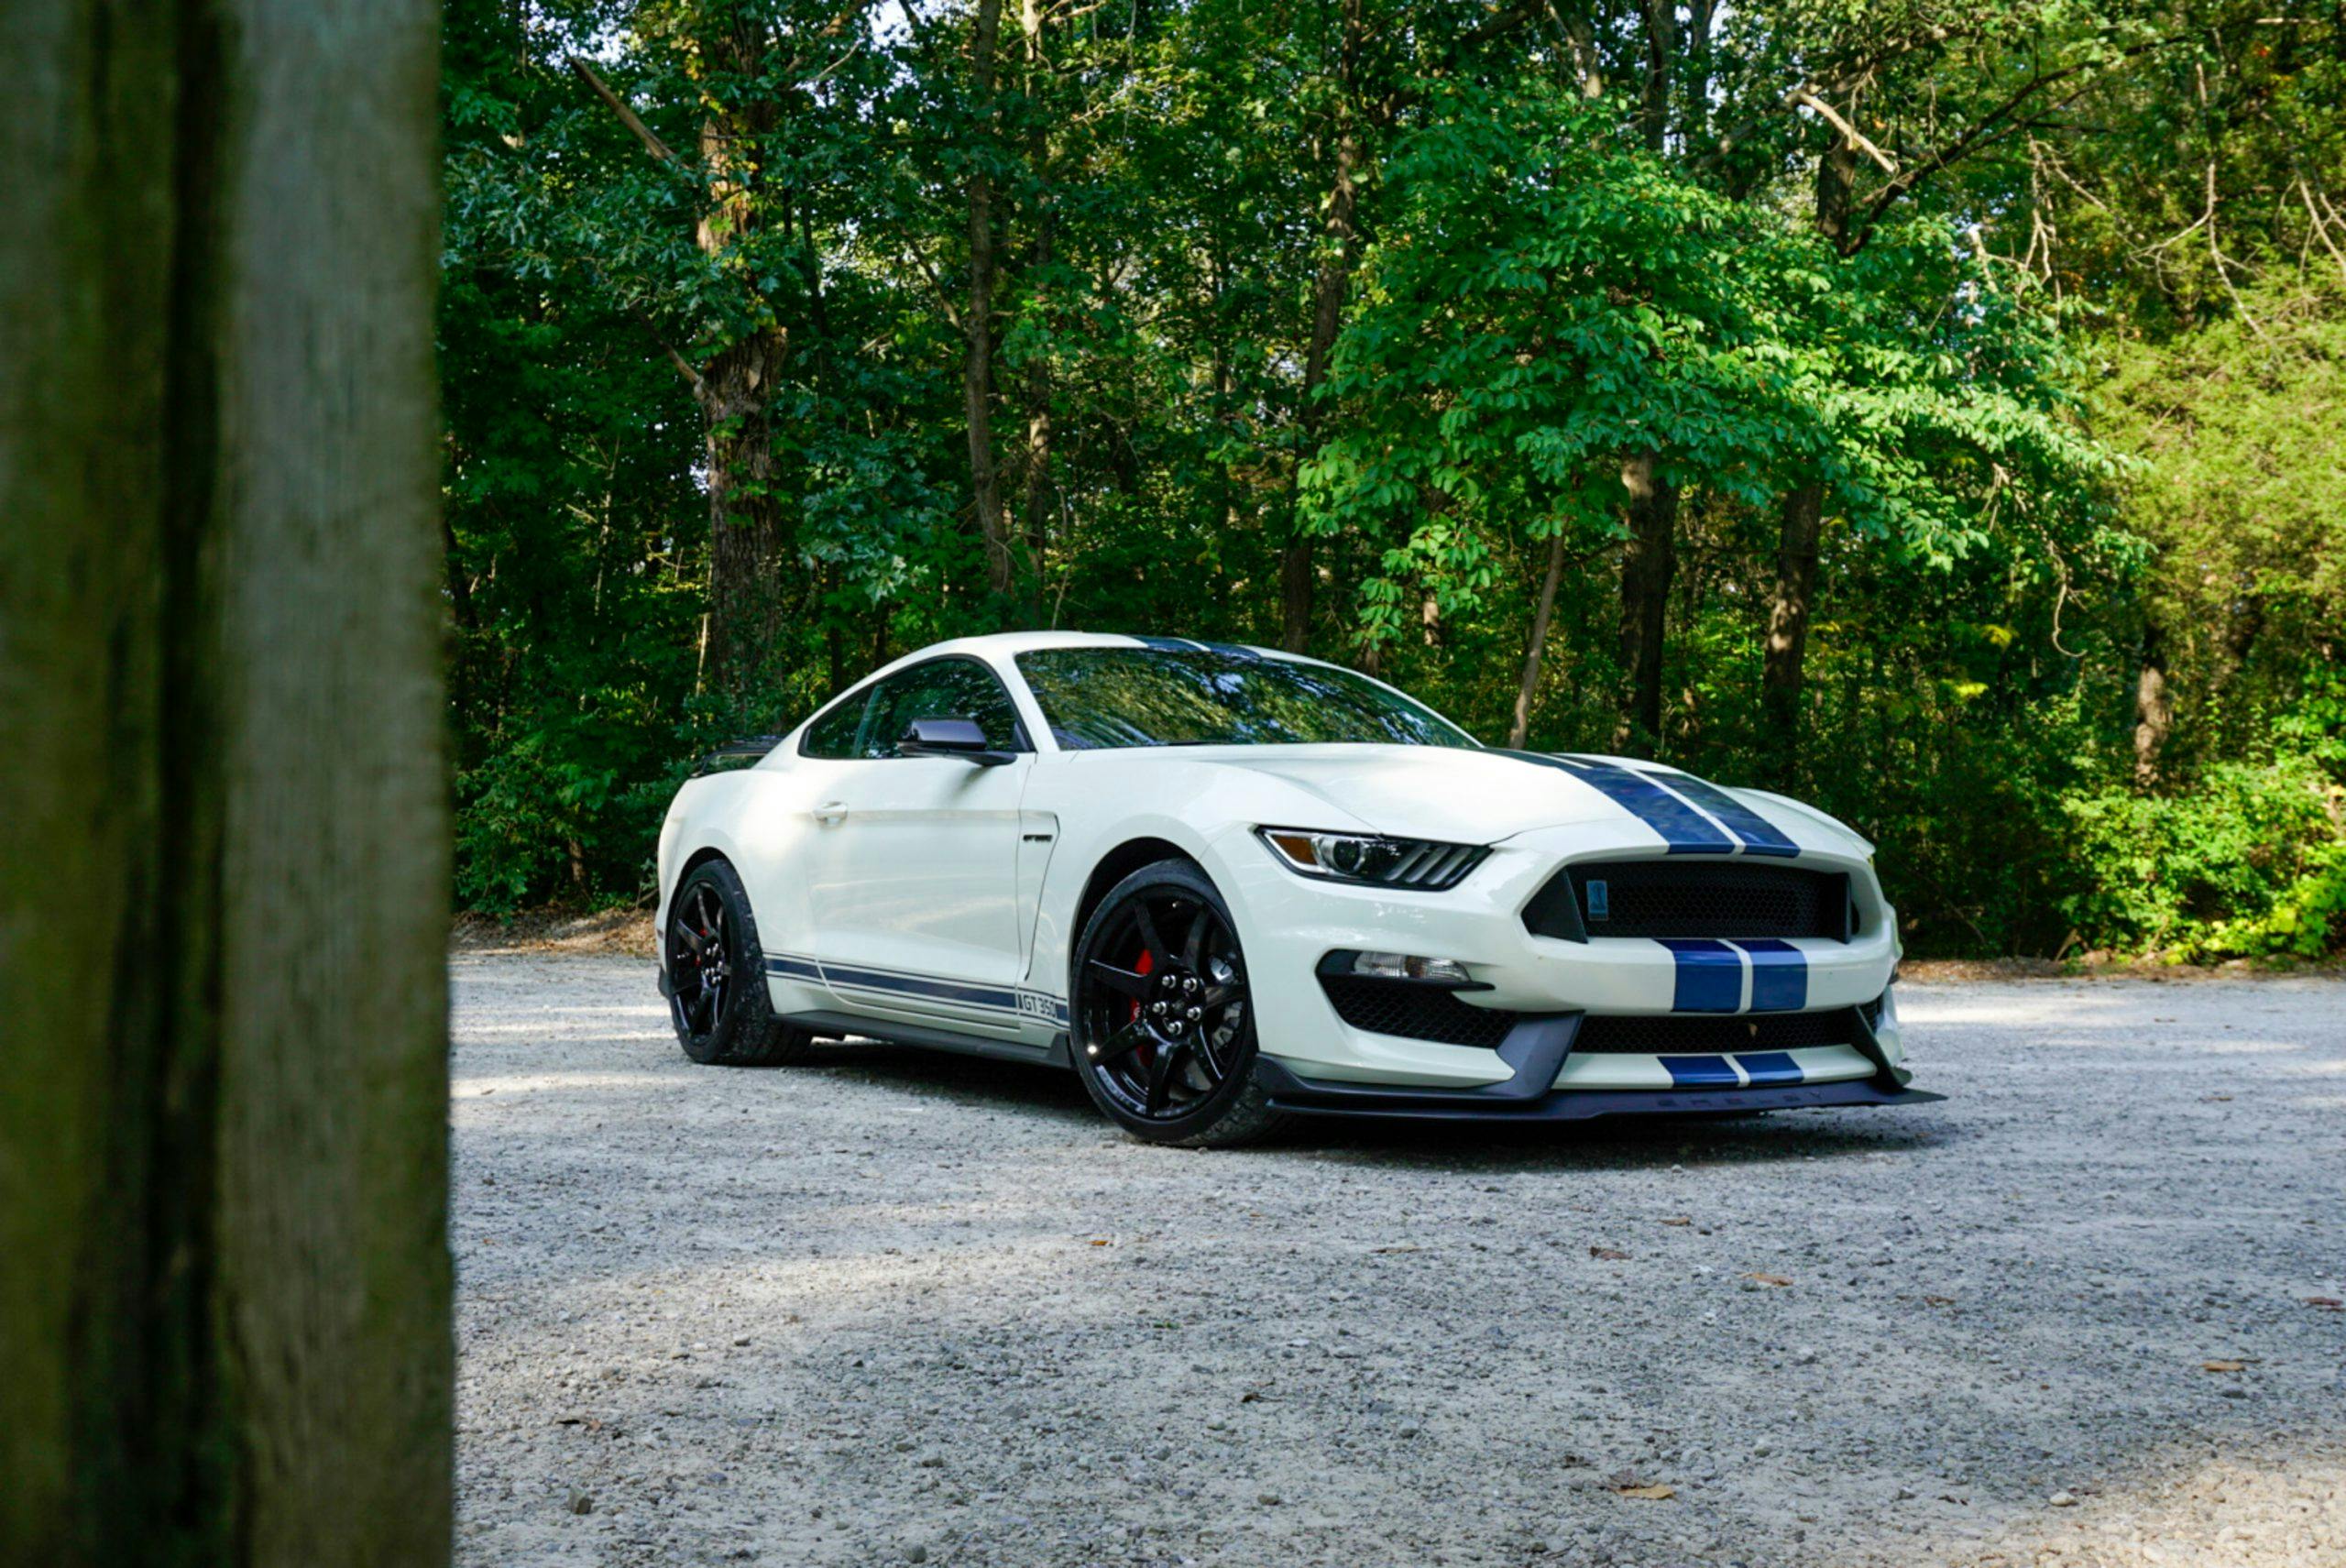 2020-Shelby-GT350R-Heritage-Edition-EW2-8-front three quarter